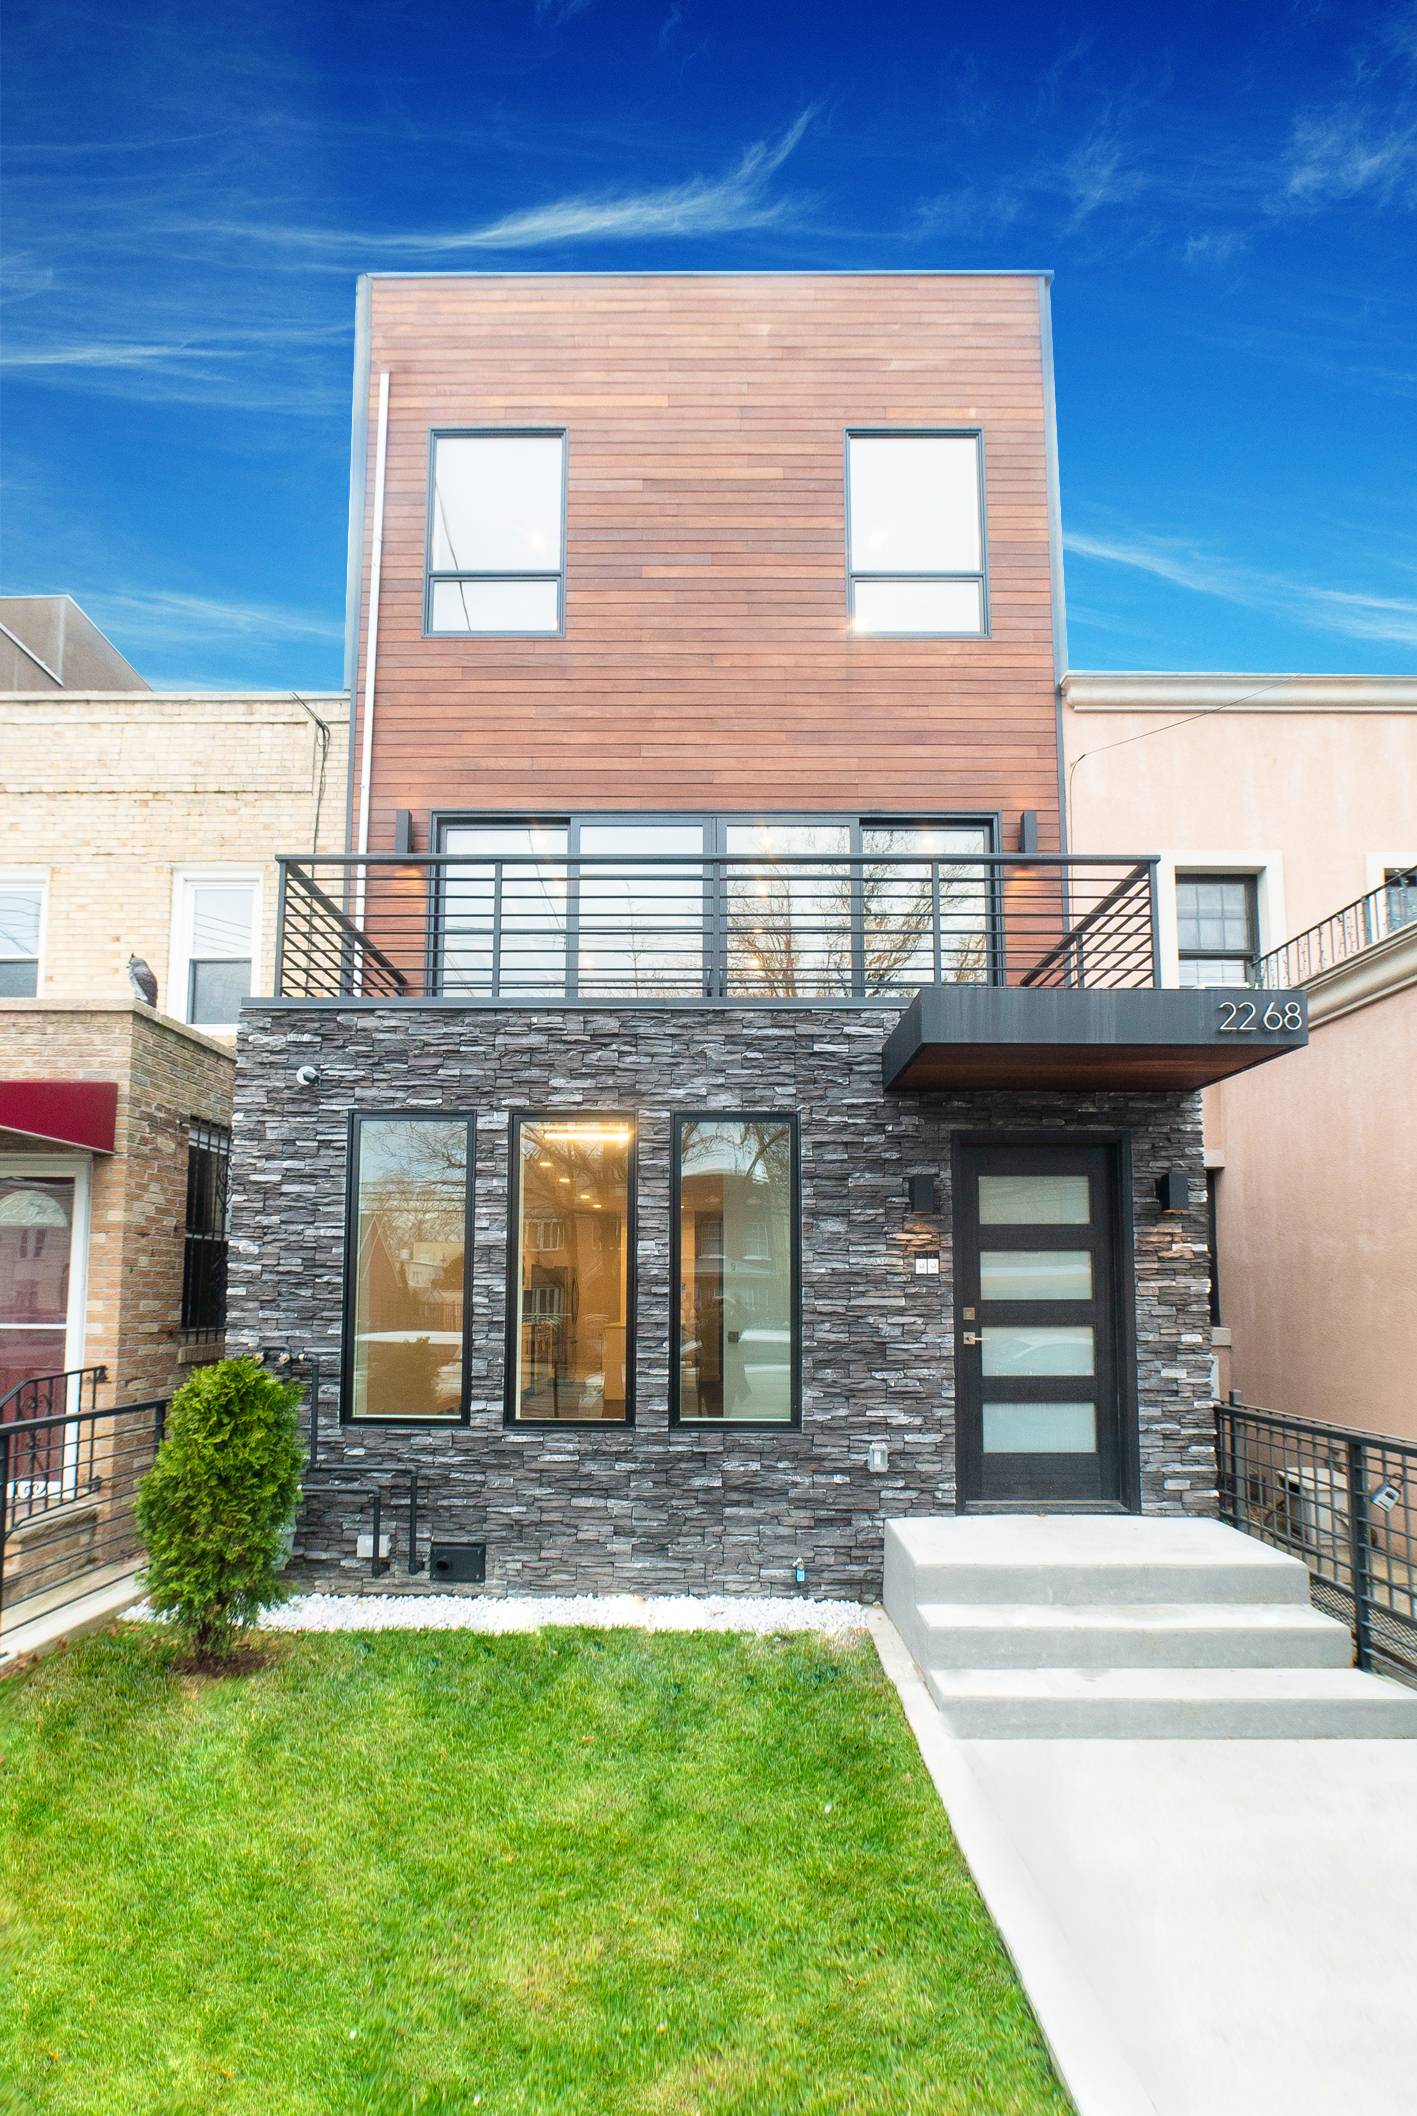 MODERN ASTORIA TWO FAMILY TOWNHOUSE, MINUTES FROM AMAZON'S NEW HQ